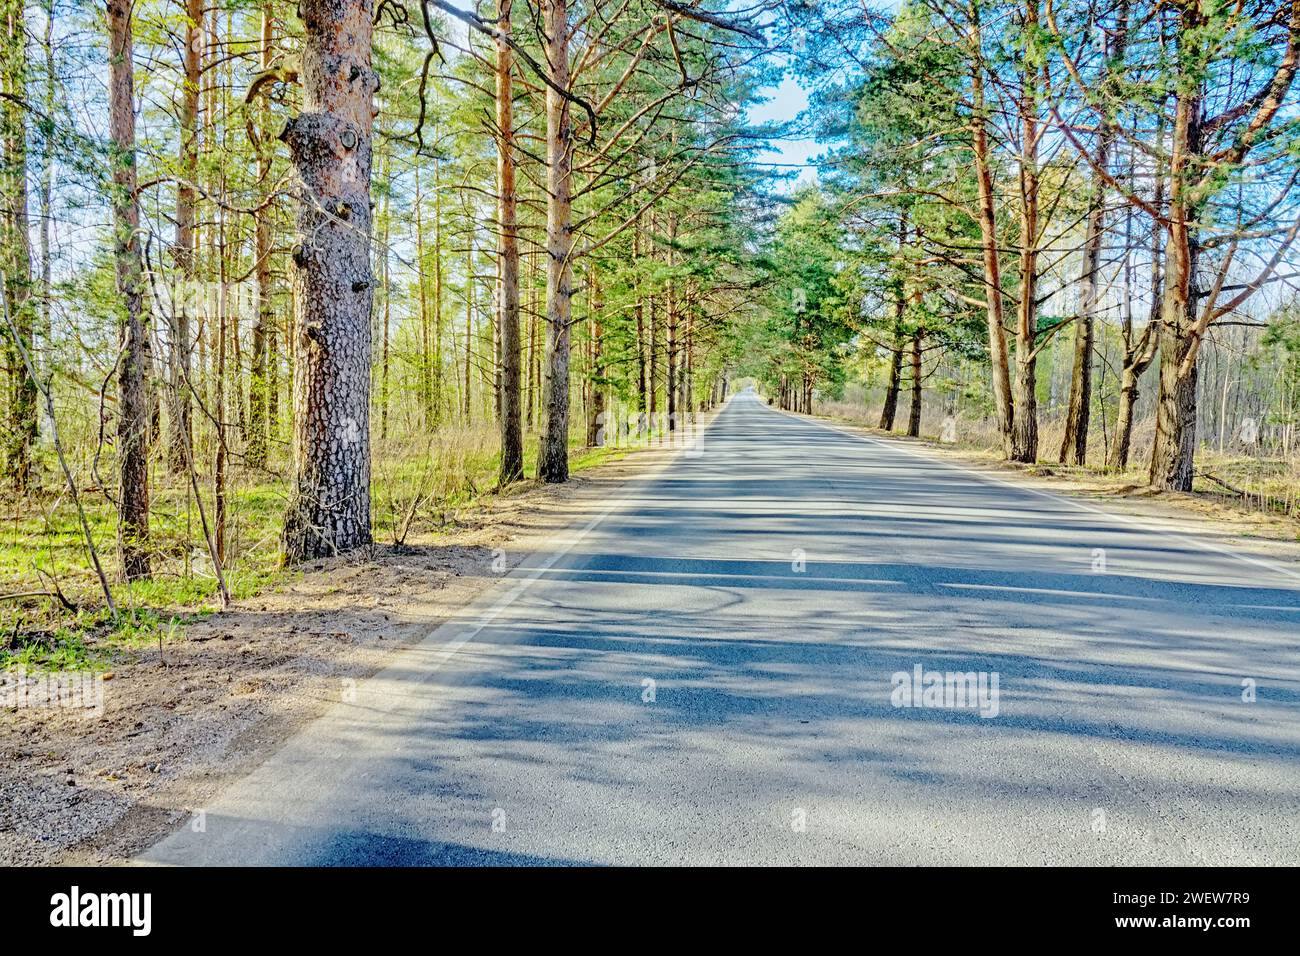 The highway is surrounded by century-old pine trees. Road alley Stock Photo